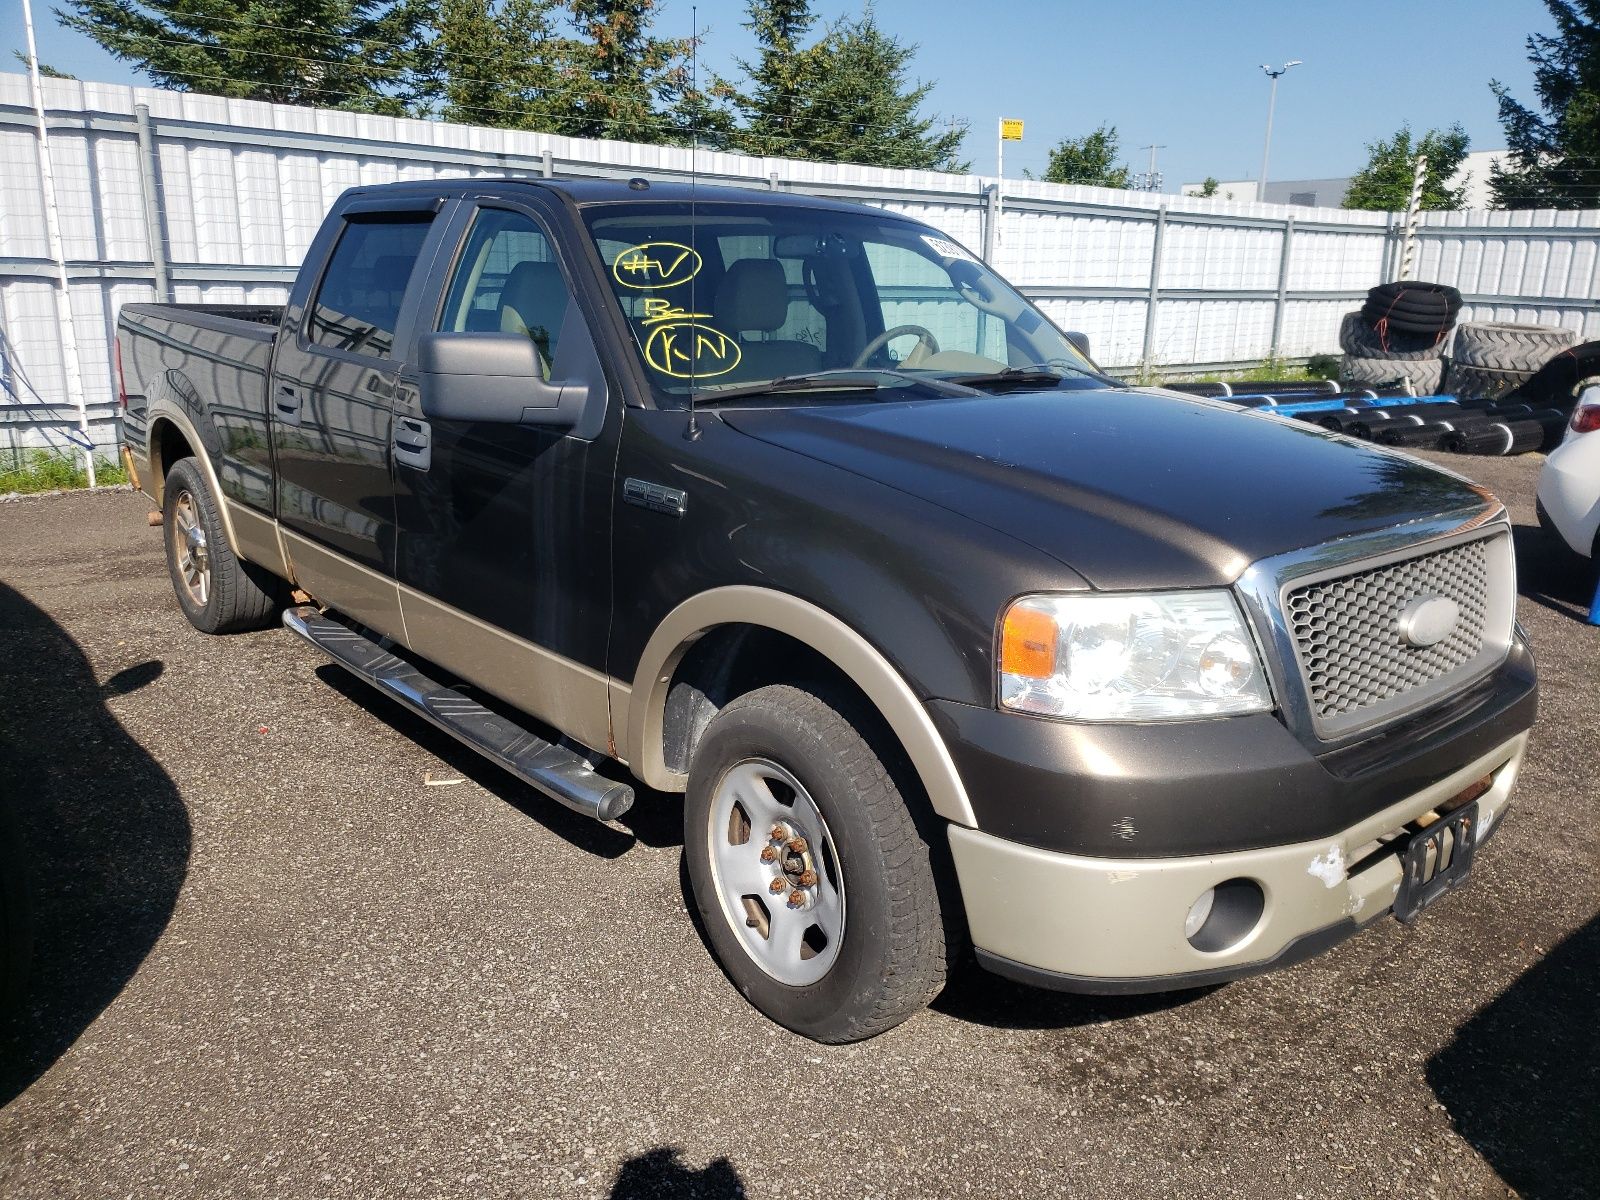 1 of 1FTPW12V98FC08592 Ford F-Series 2008